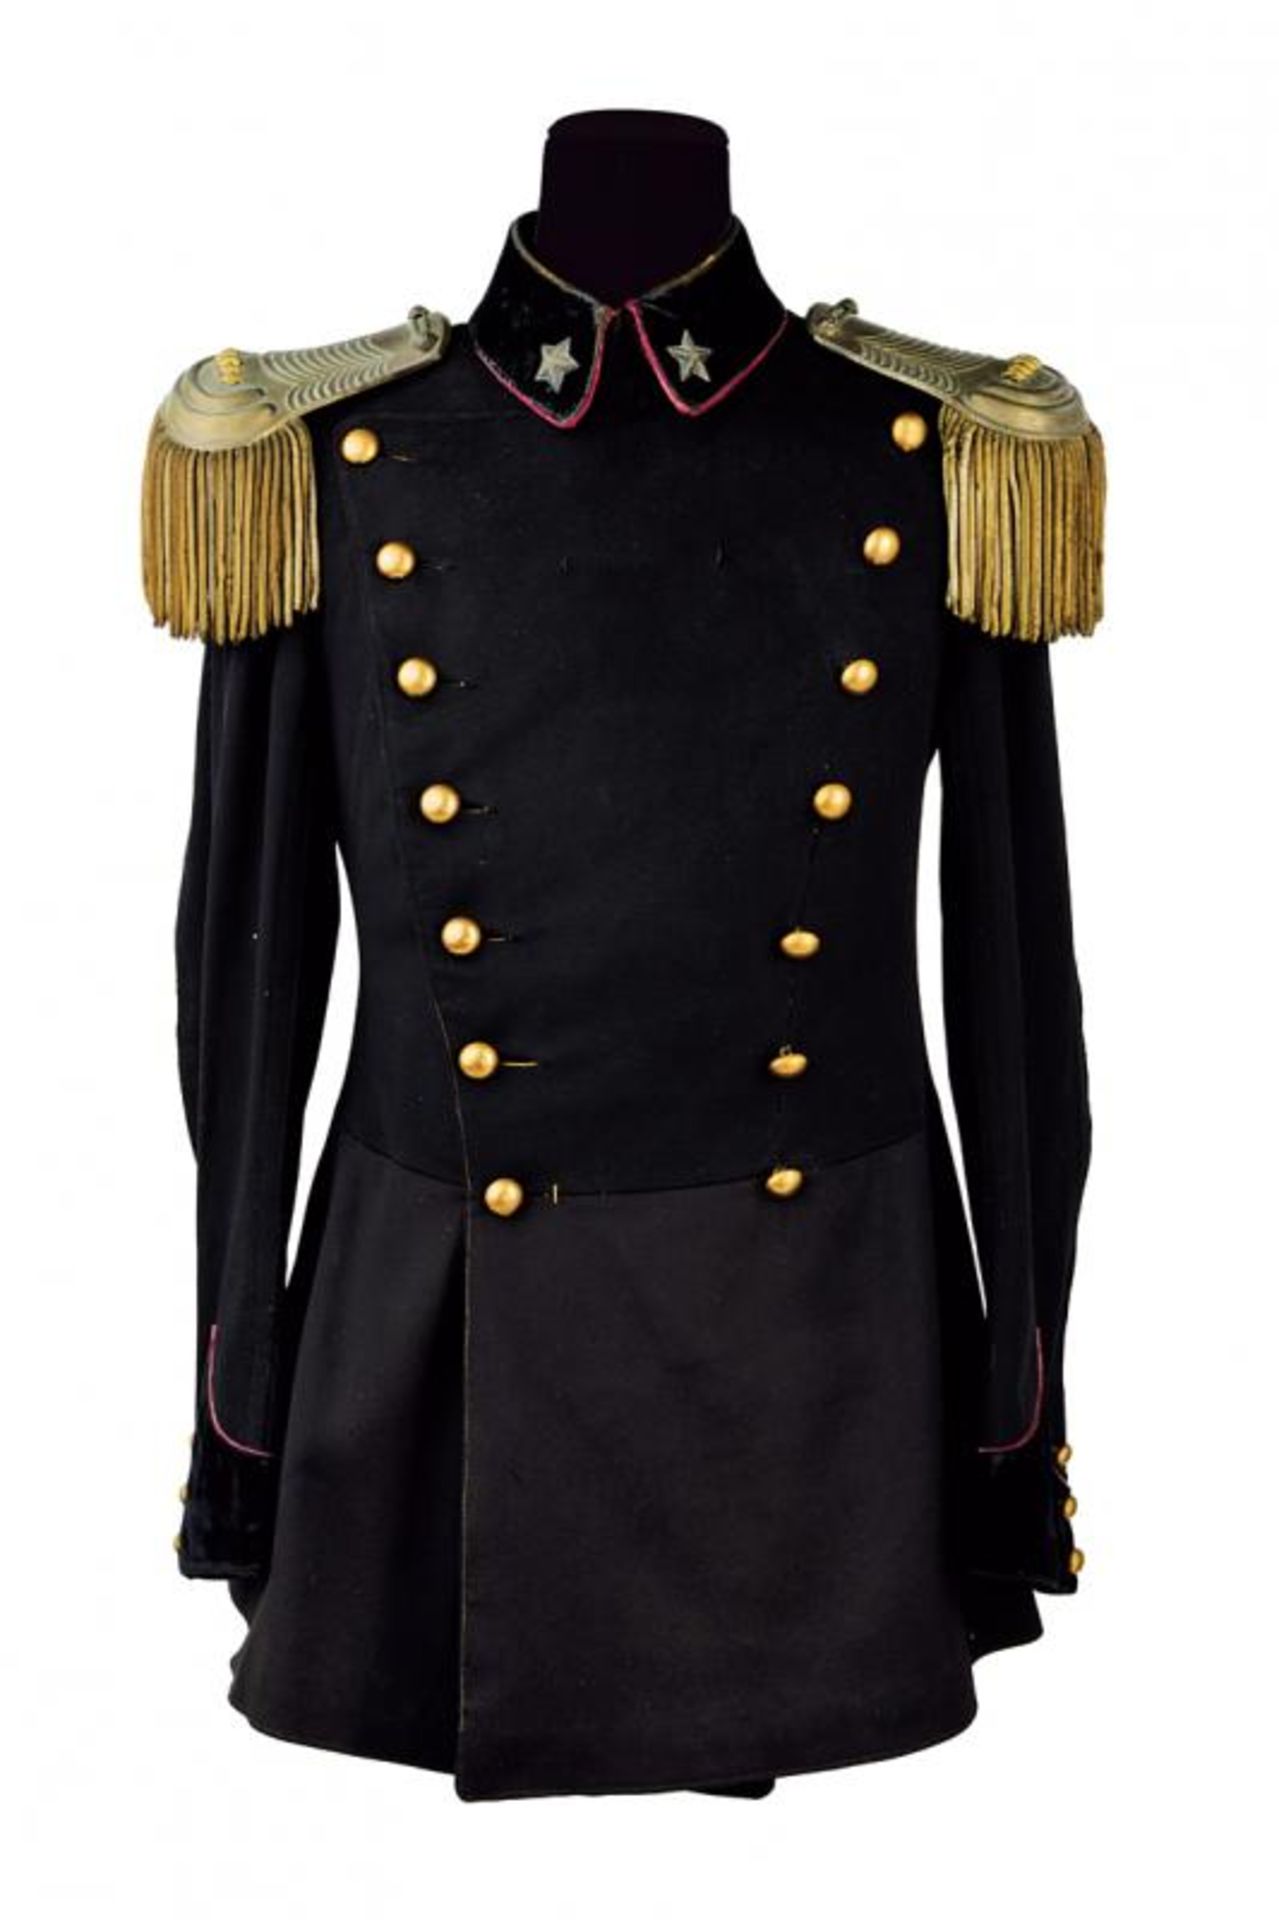 A rare uniform for a medic officer of the Red Cross